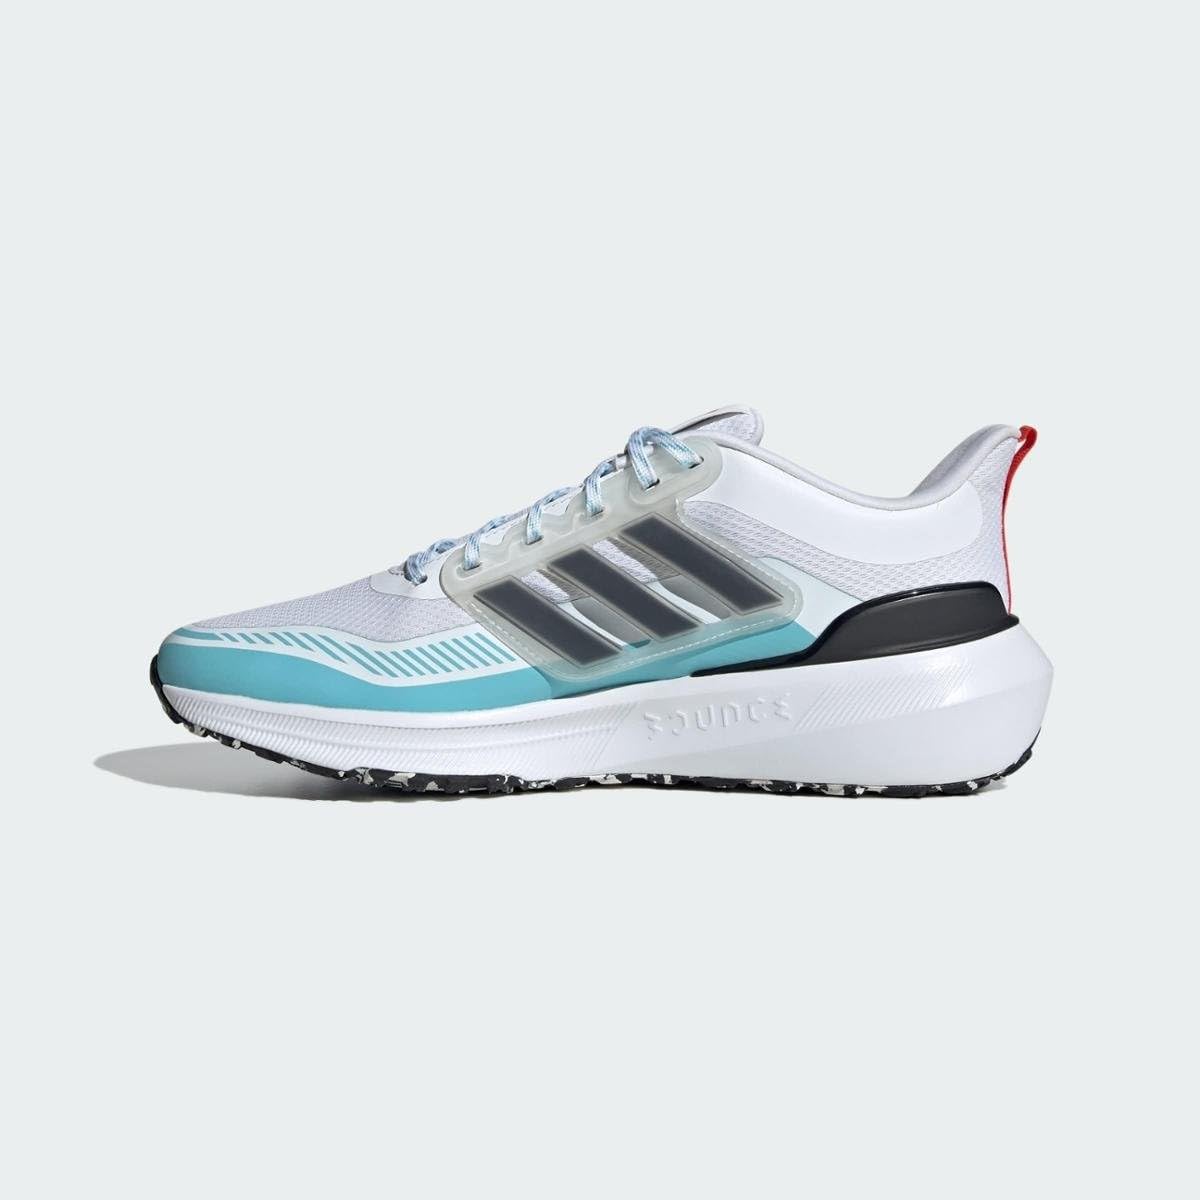 Brand: adidas adidas Mens Ultrabounce TrRunning Shoes